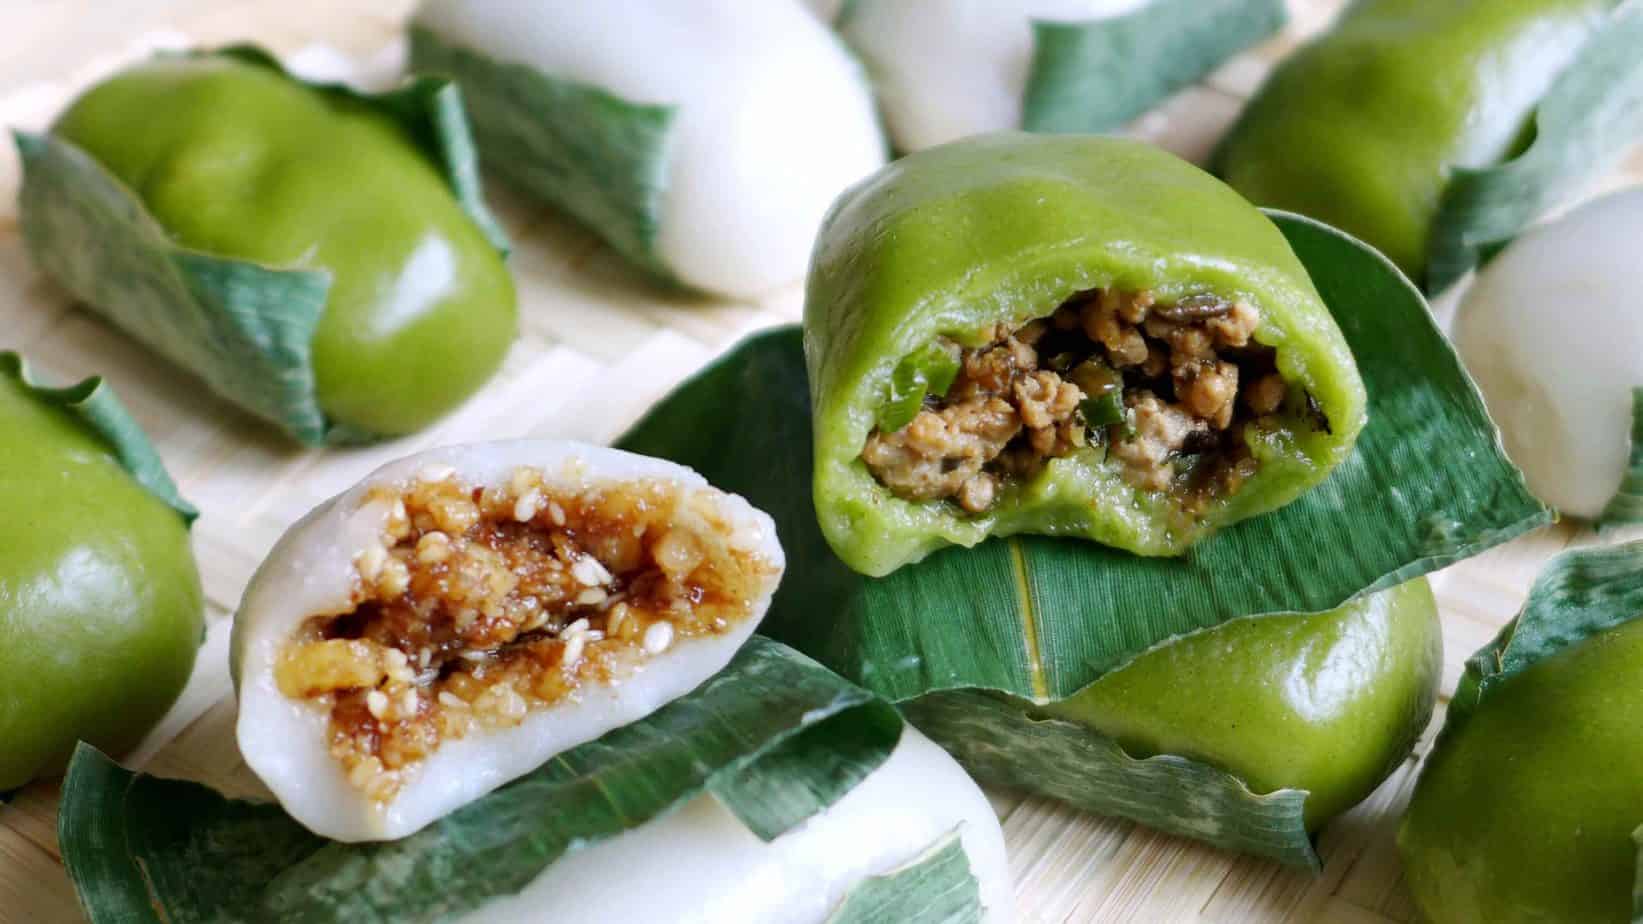 Sticky rice cakes filled with two different fillings